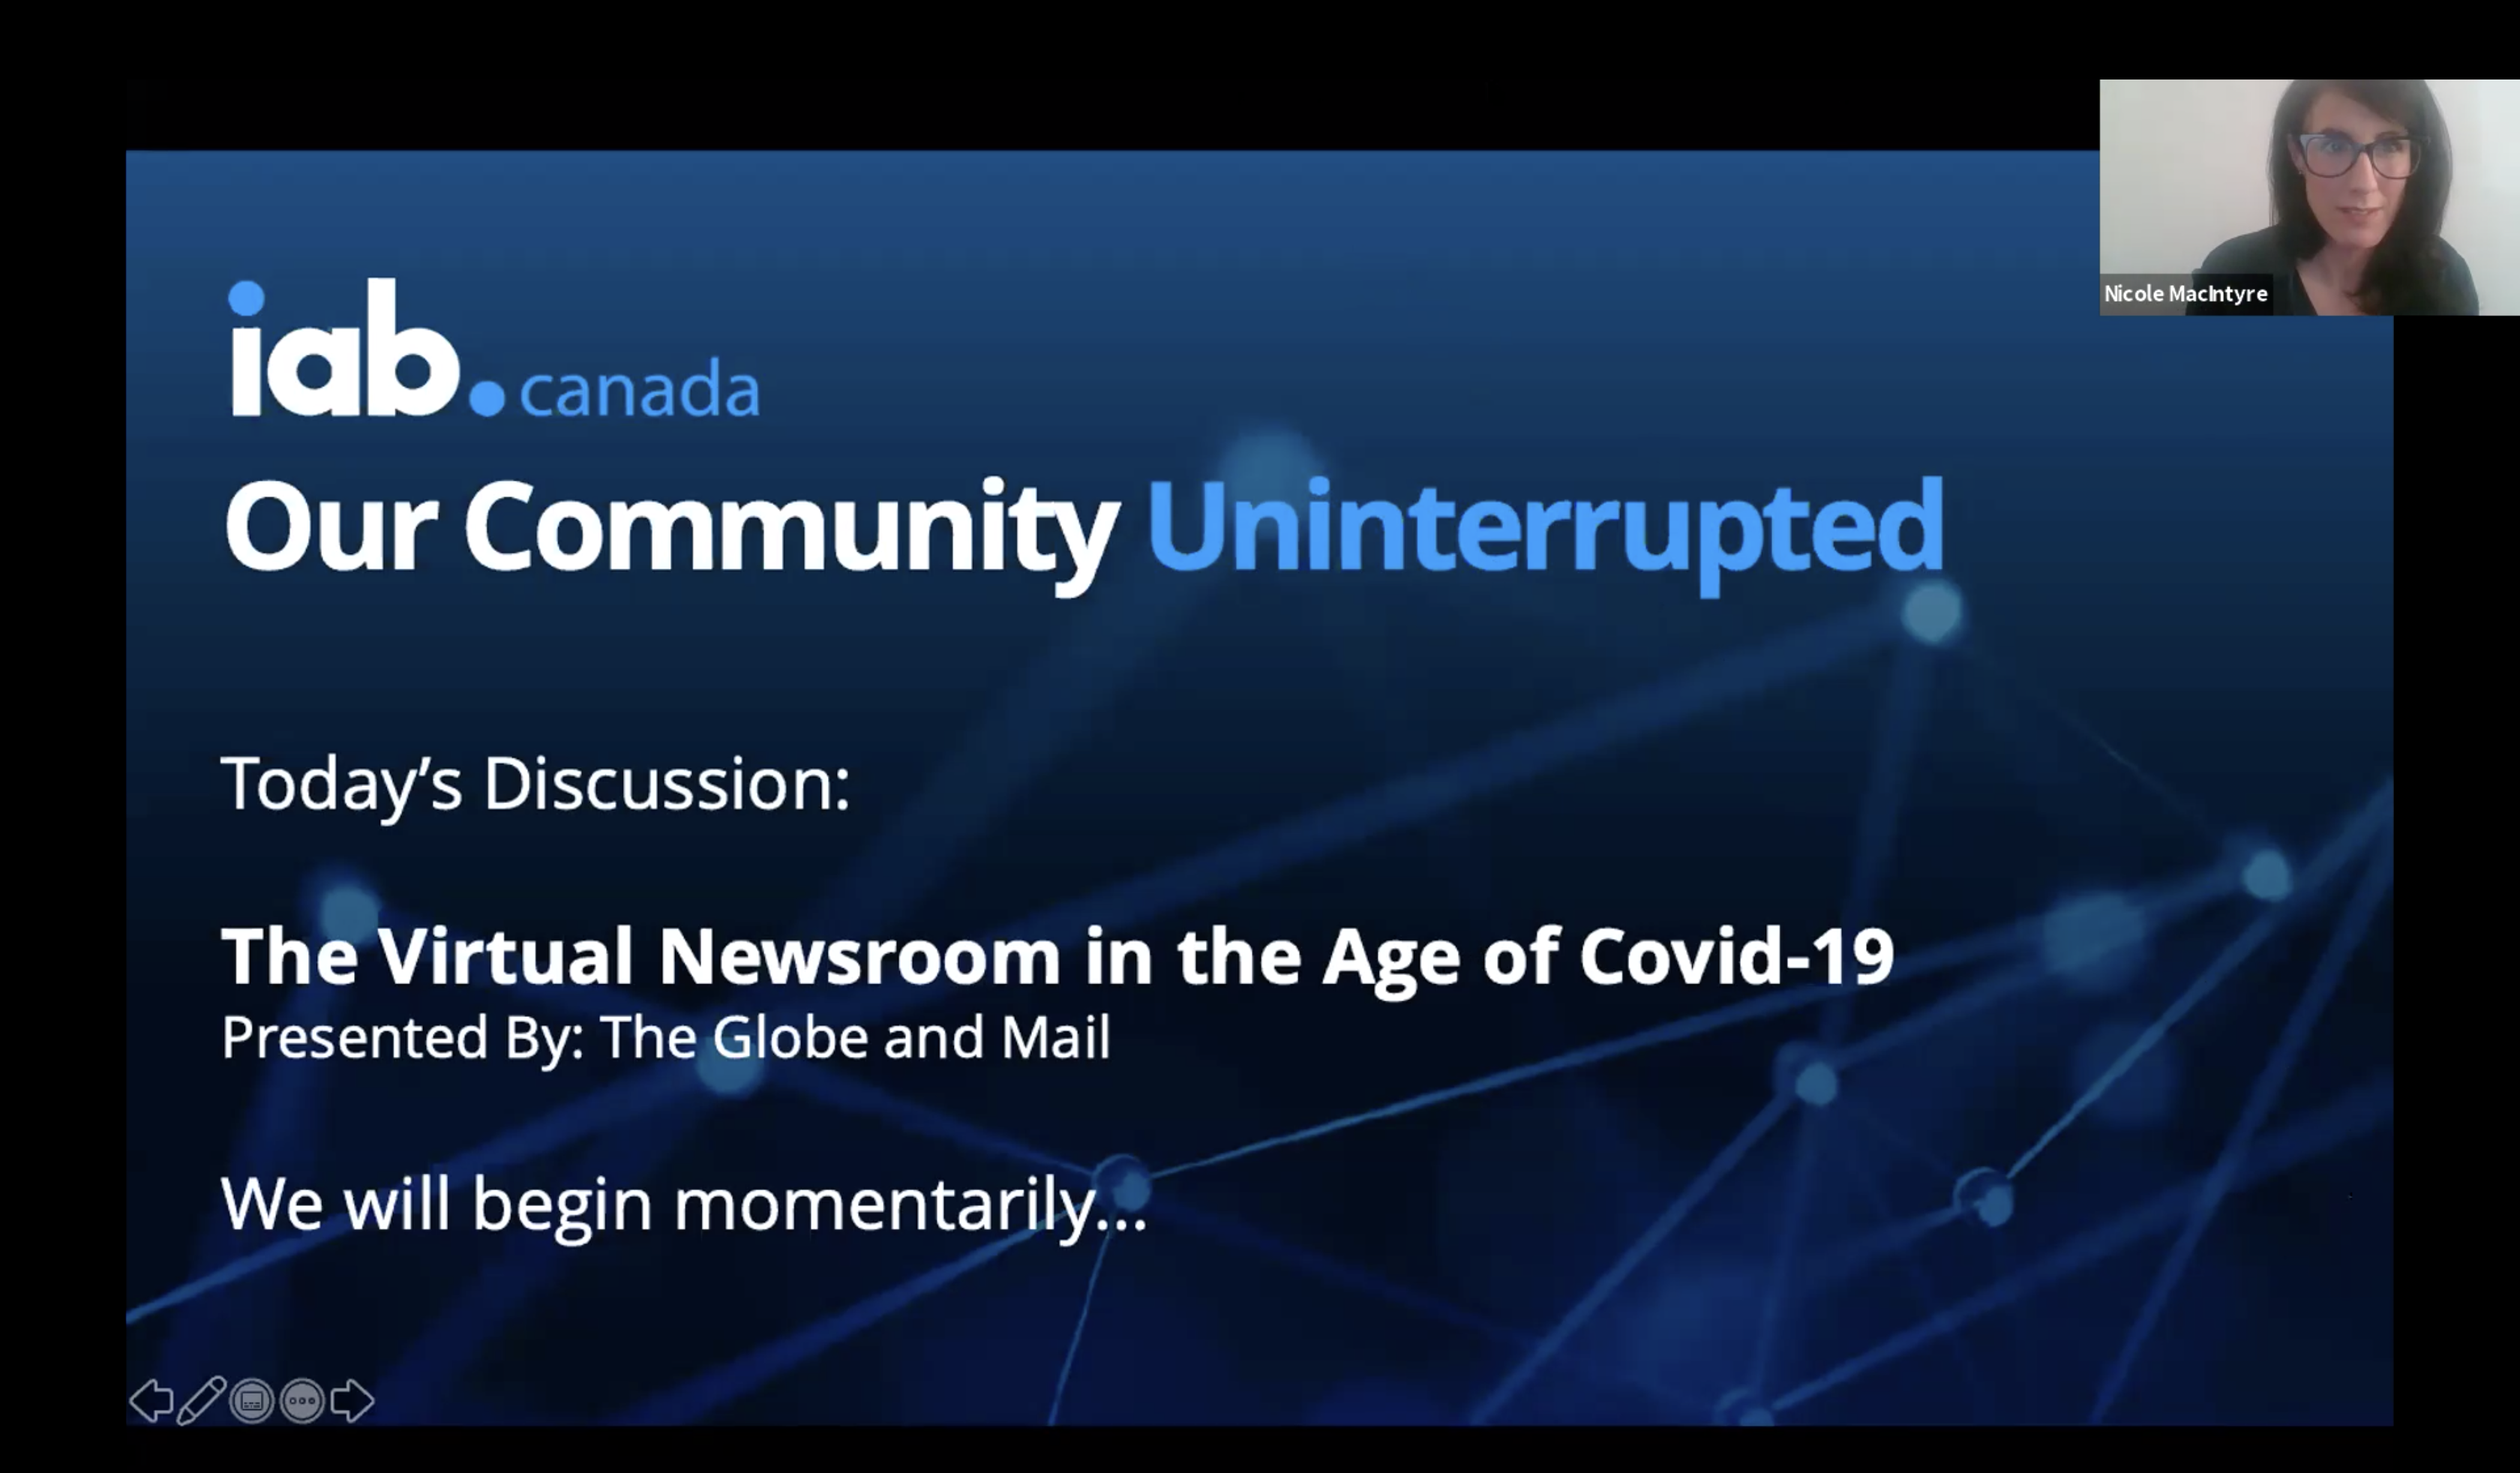 Inside the virtual newsroom in the age of COVID-19